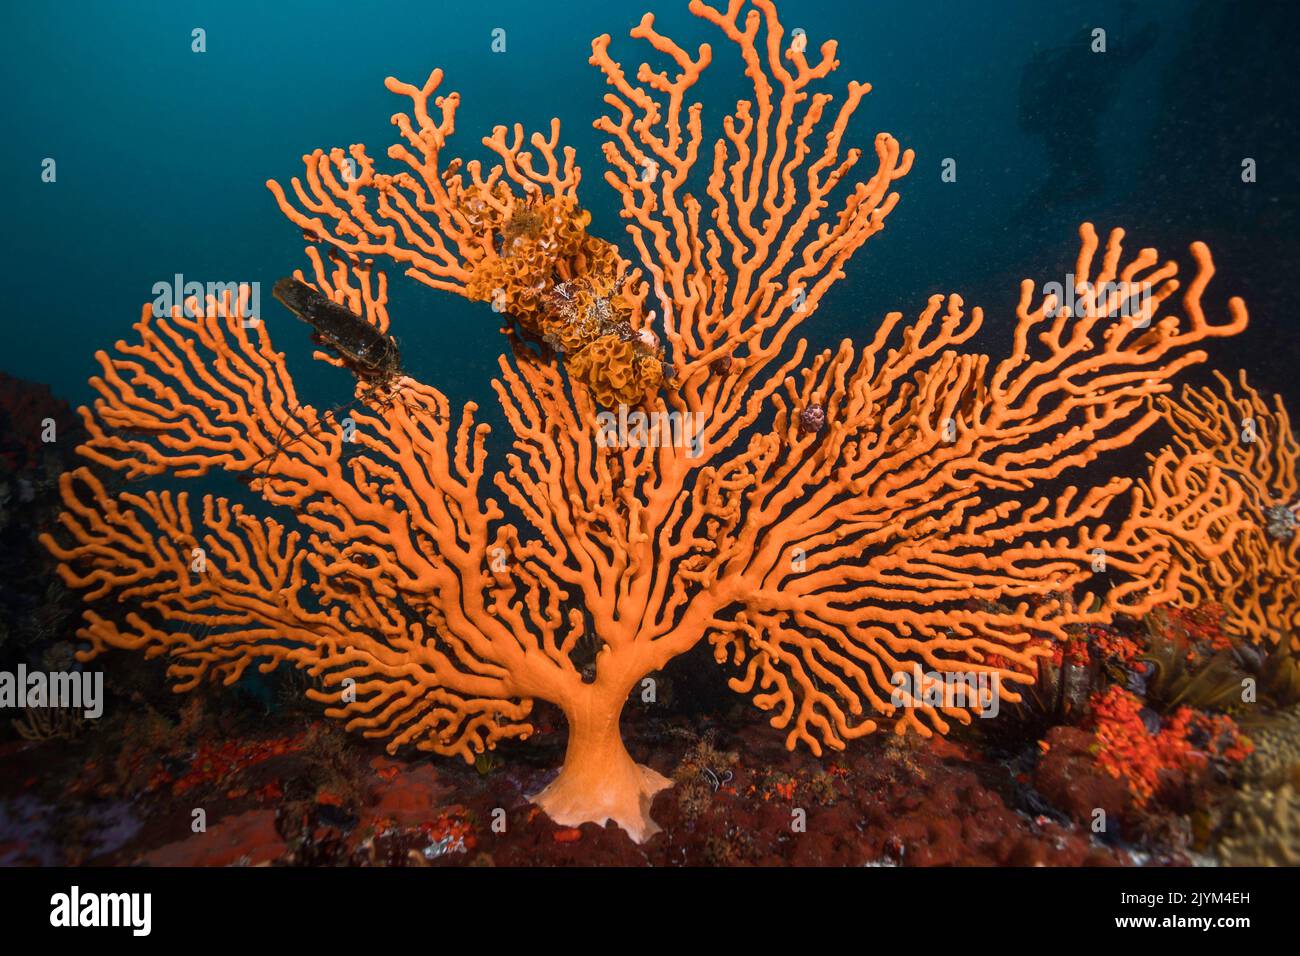 A single large bright orange Sinuous sea fan (Eunicella tricoronata) standing out against the dark background Stock Photo